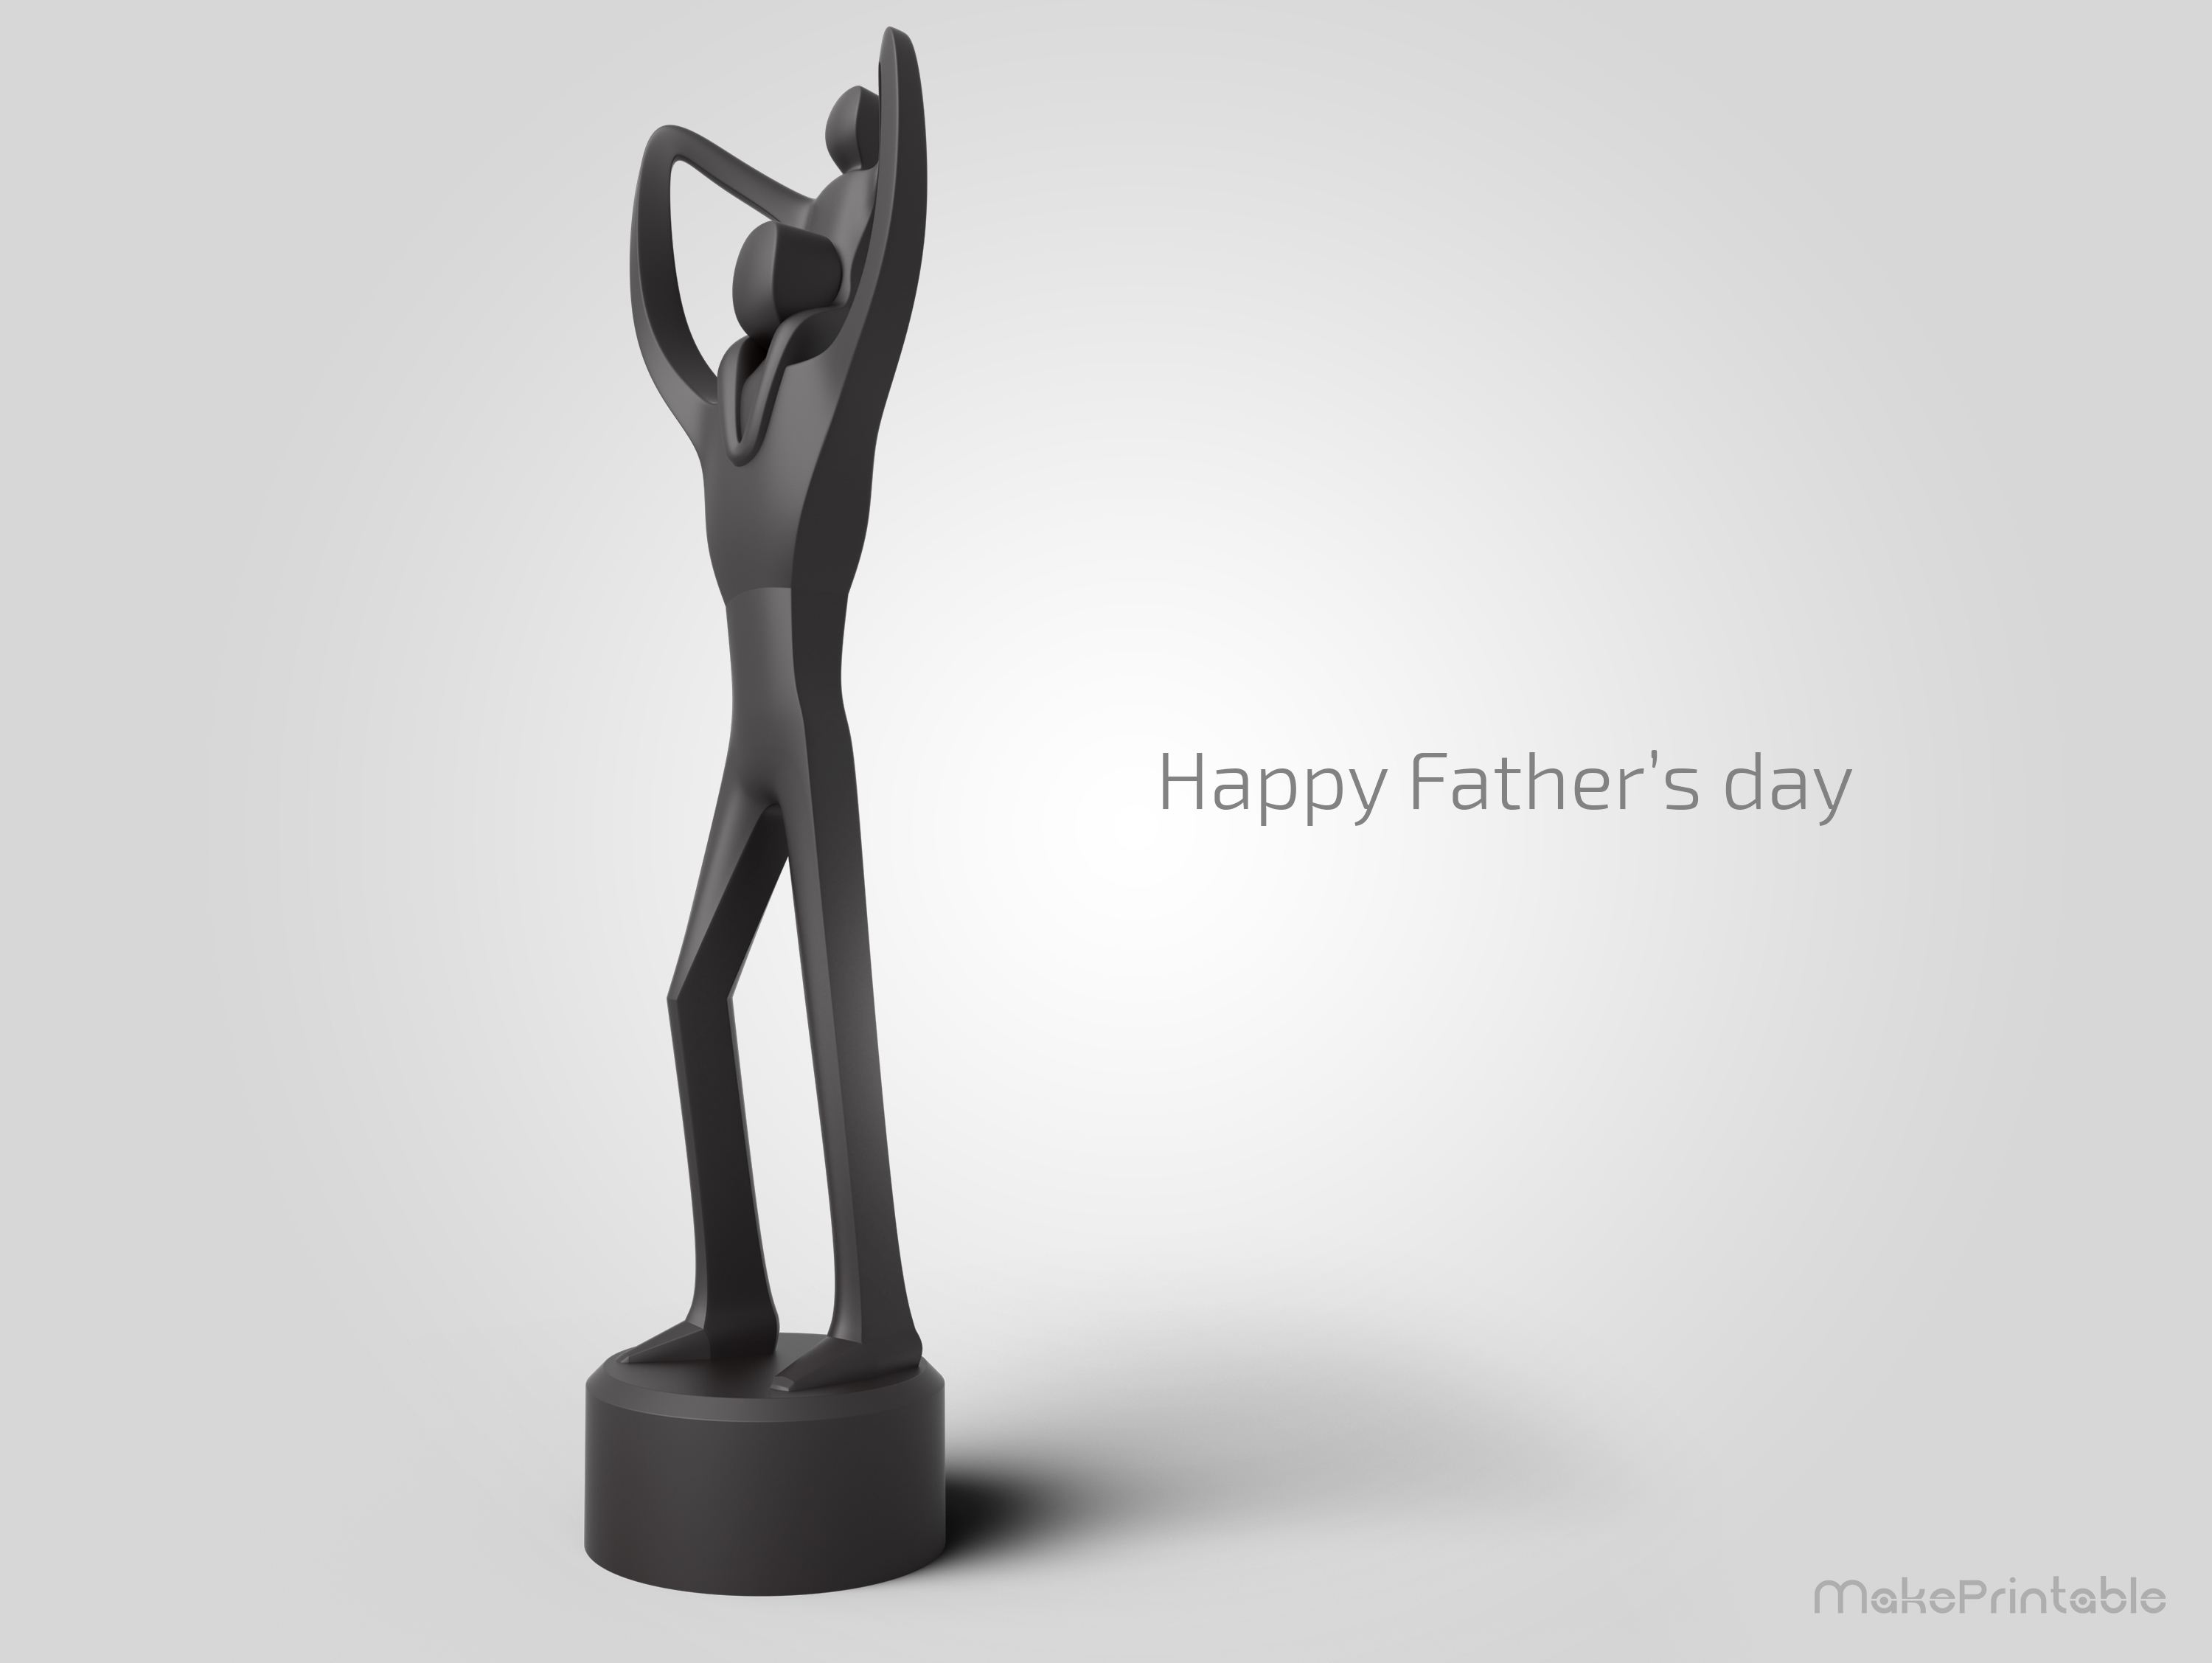 3D Printed Father's Day Sculpture by MakePrintable | Pinshape